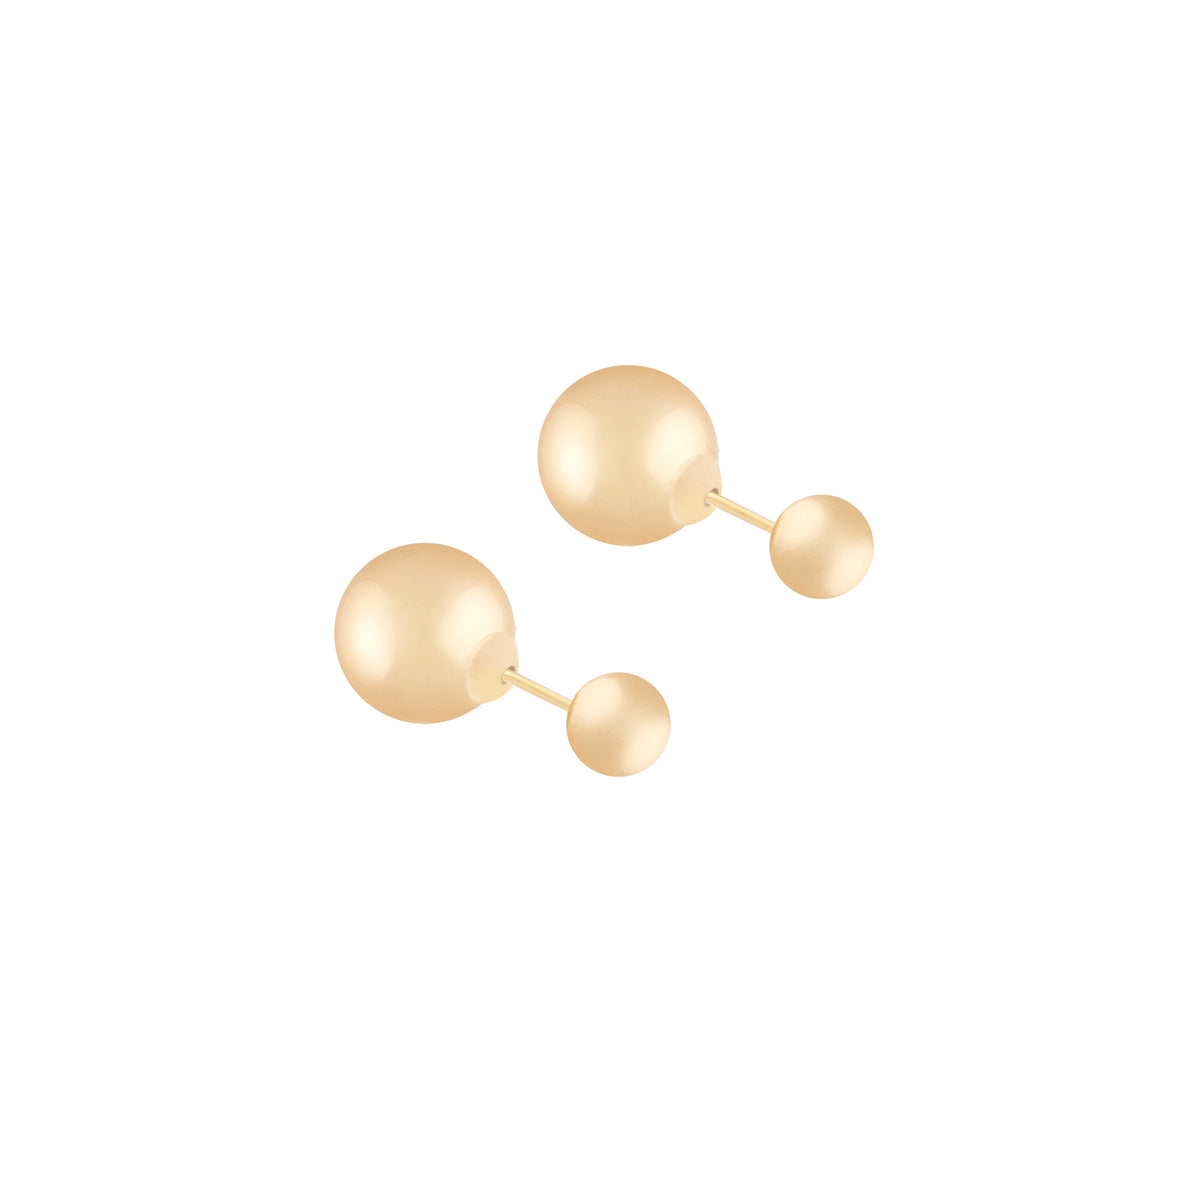 Montaigne Earrings - Gold